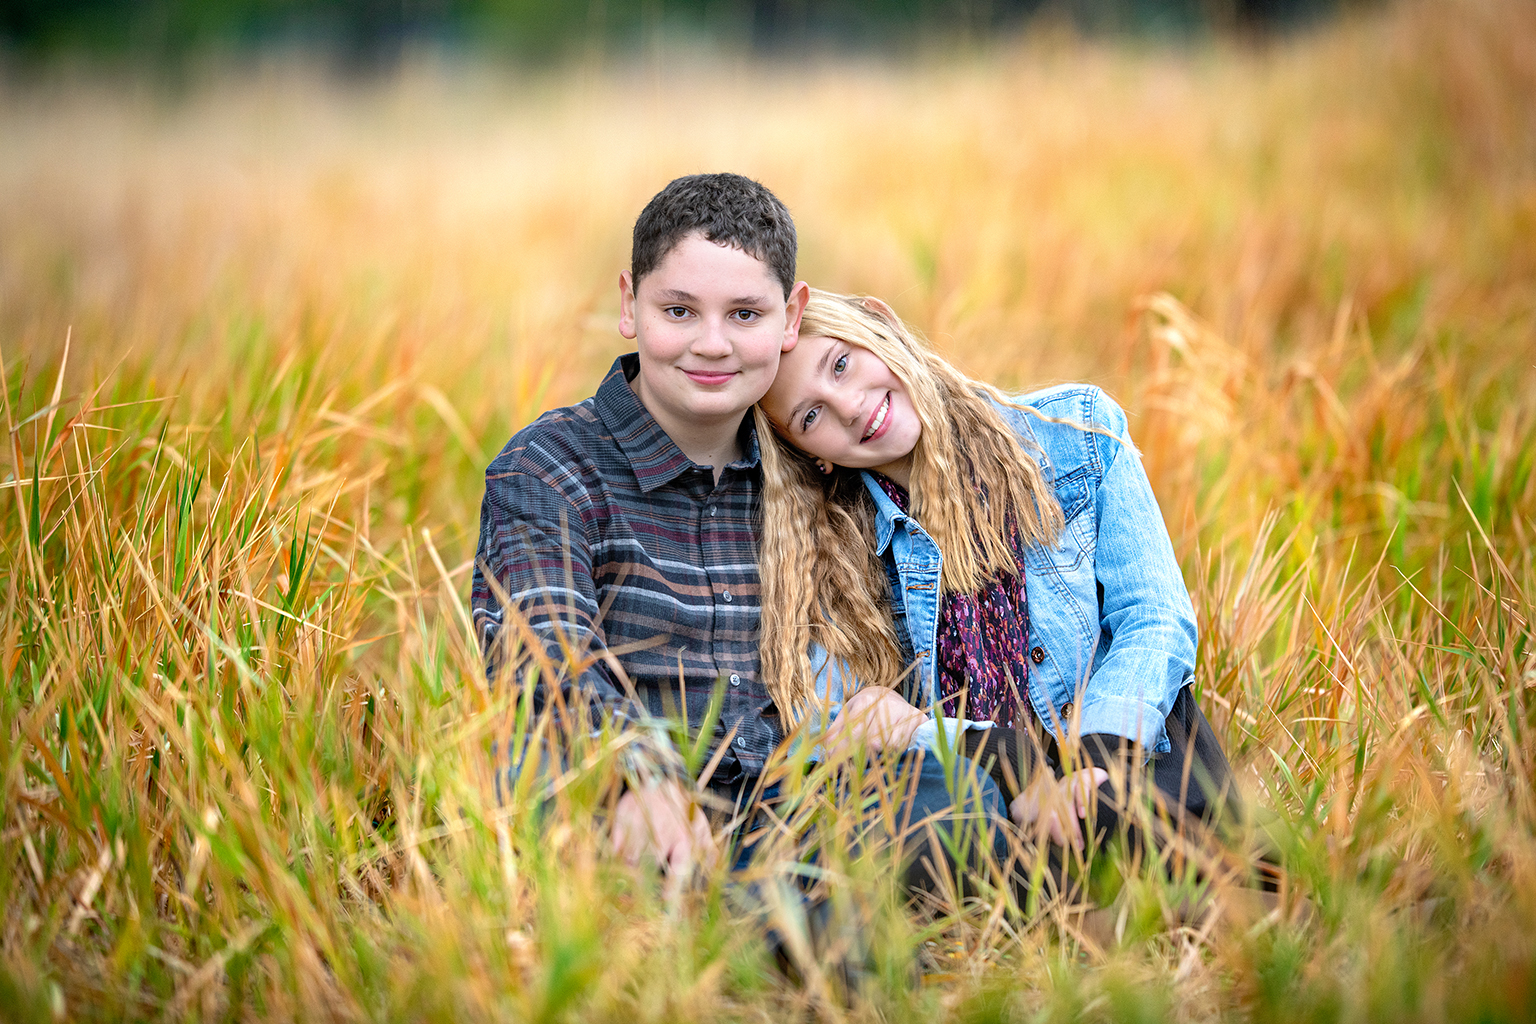 A brother with a sister sitting in a field.